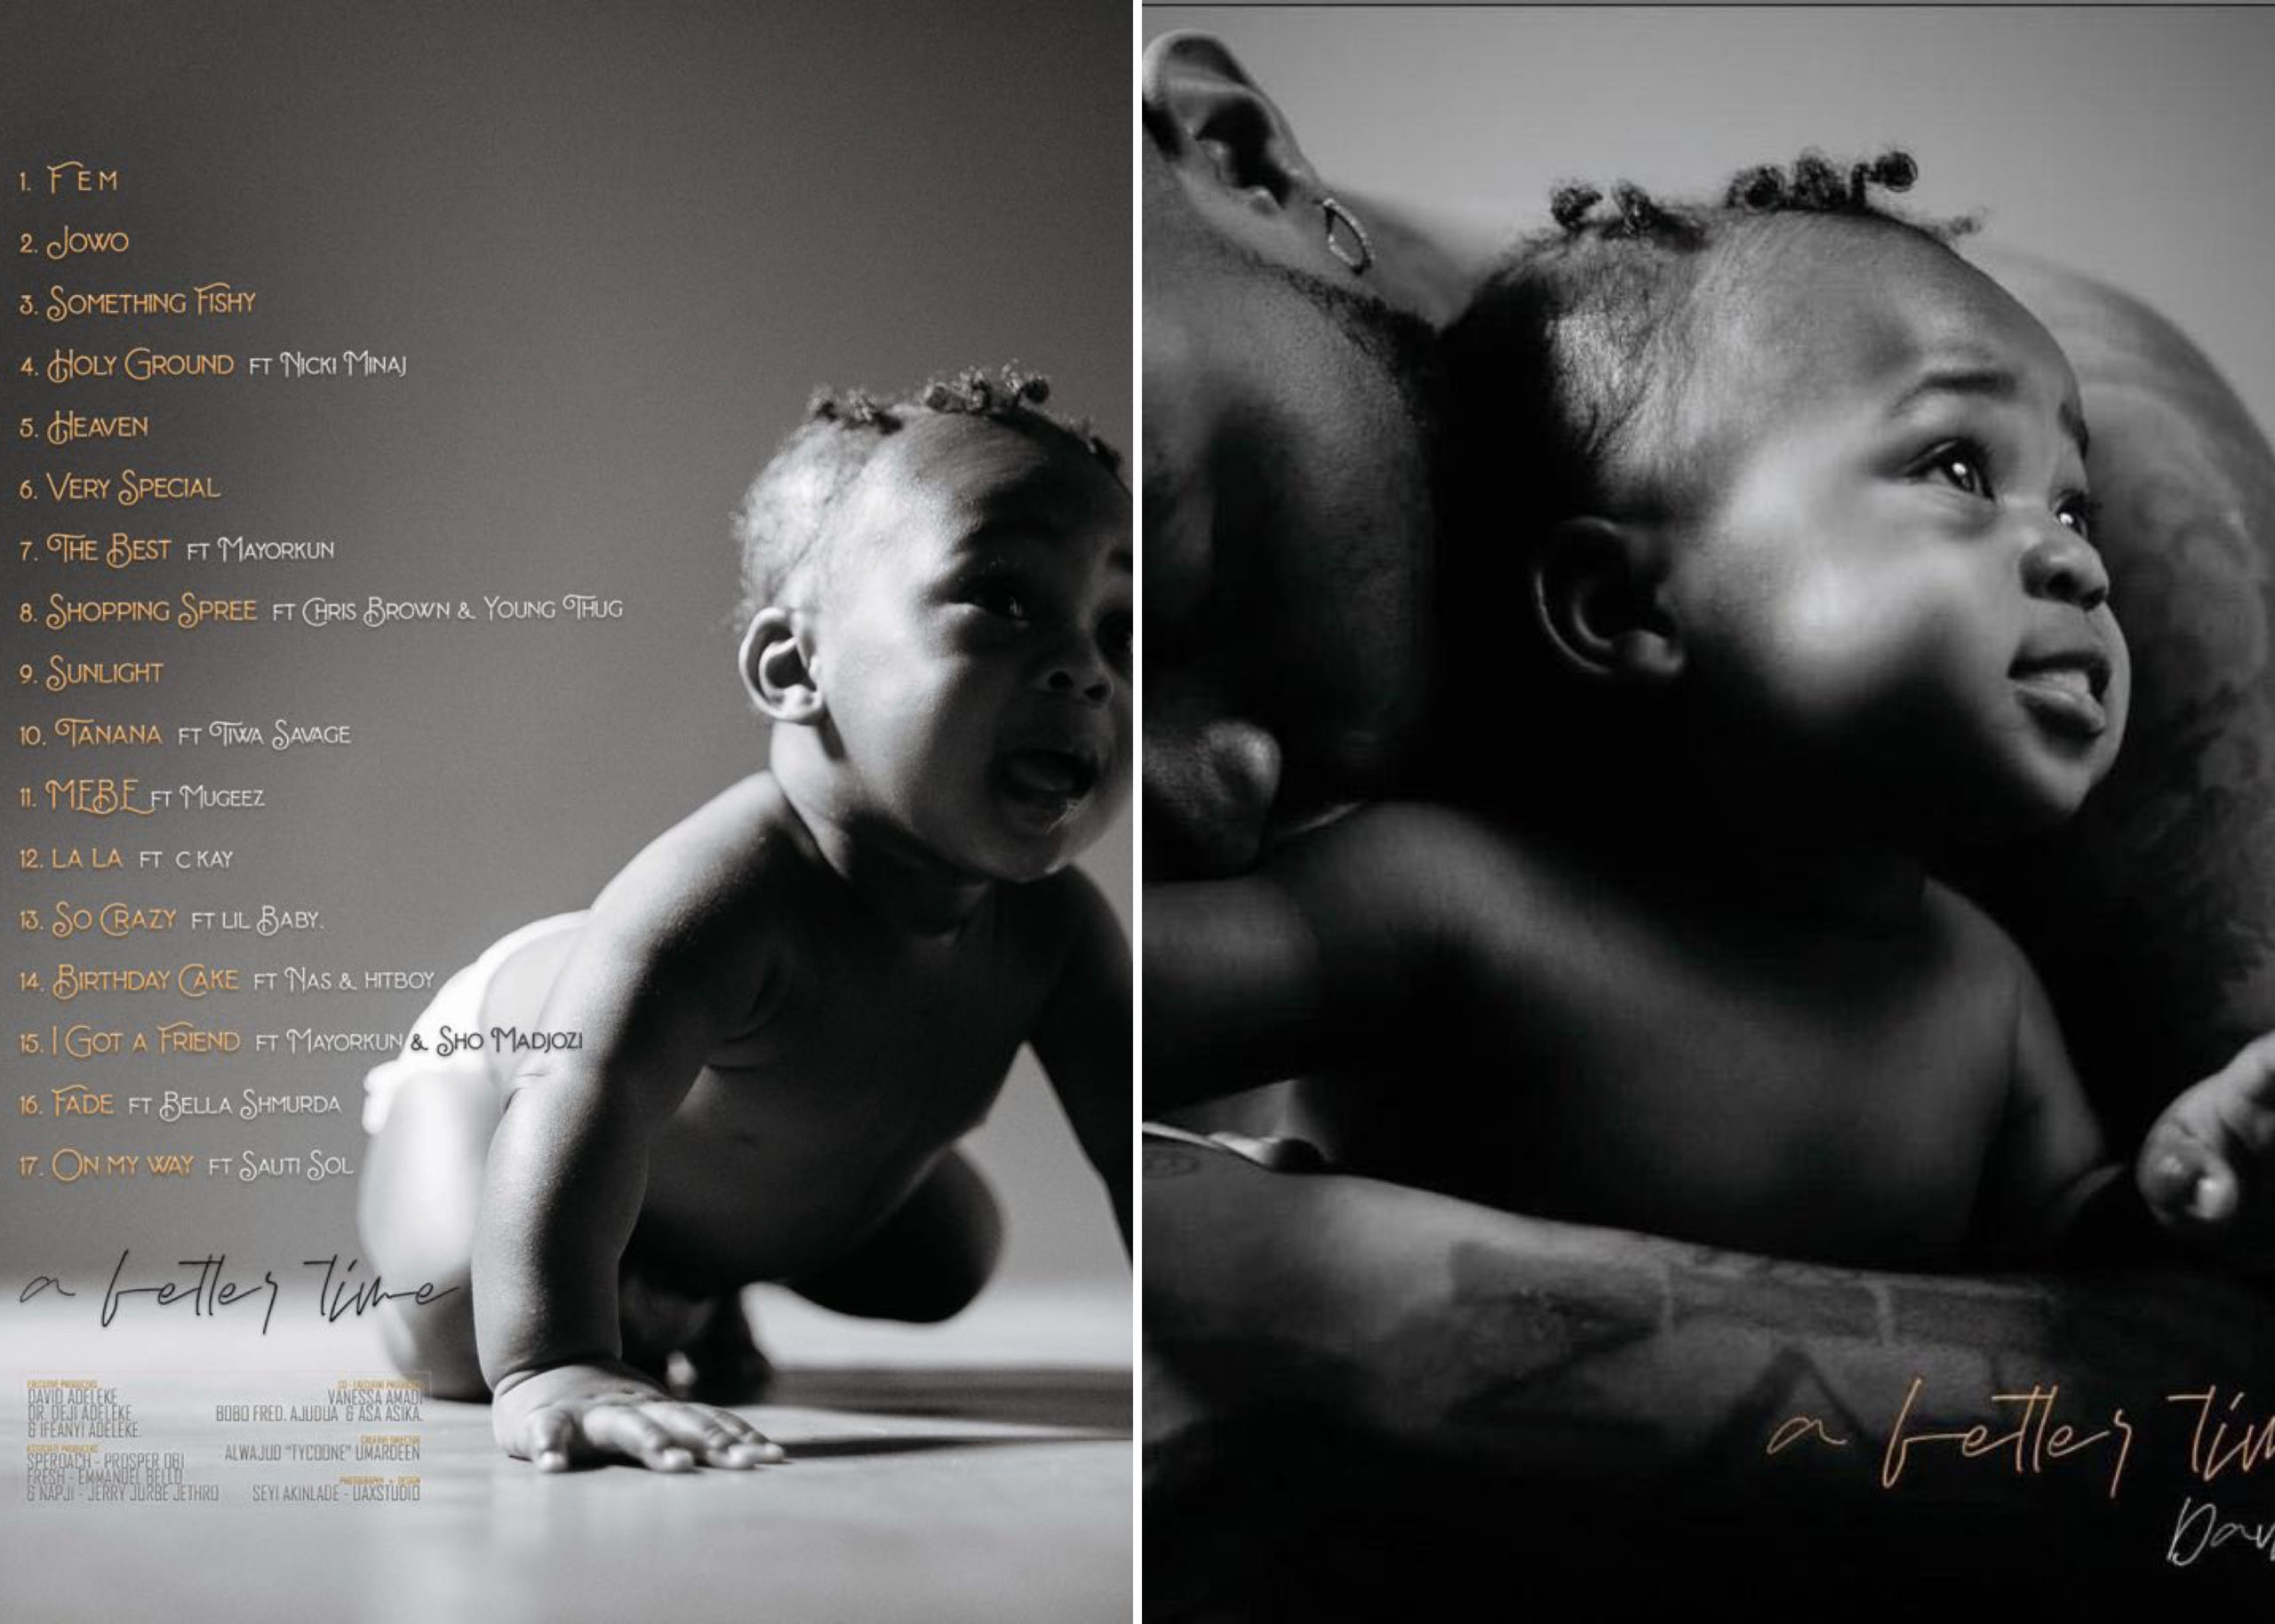 Davido Finally Unveils Son’s Face, Ifeanyi In ‘A Better Time’ Album Cover, Releases Track List